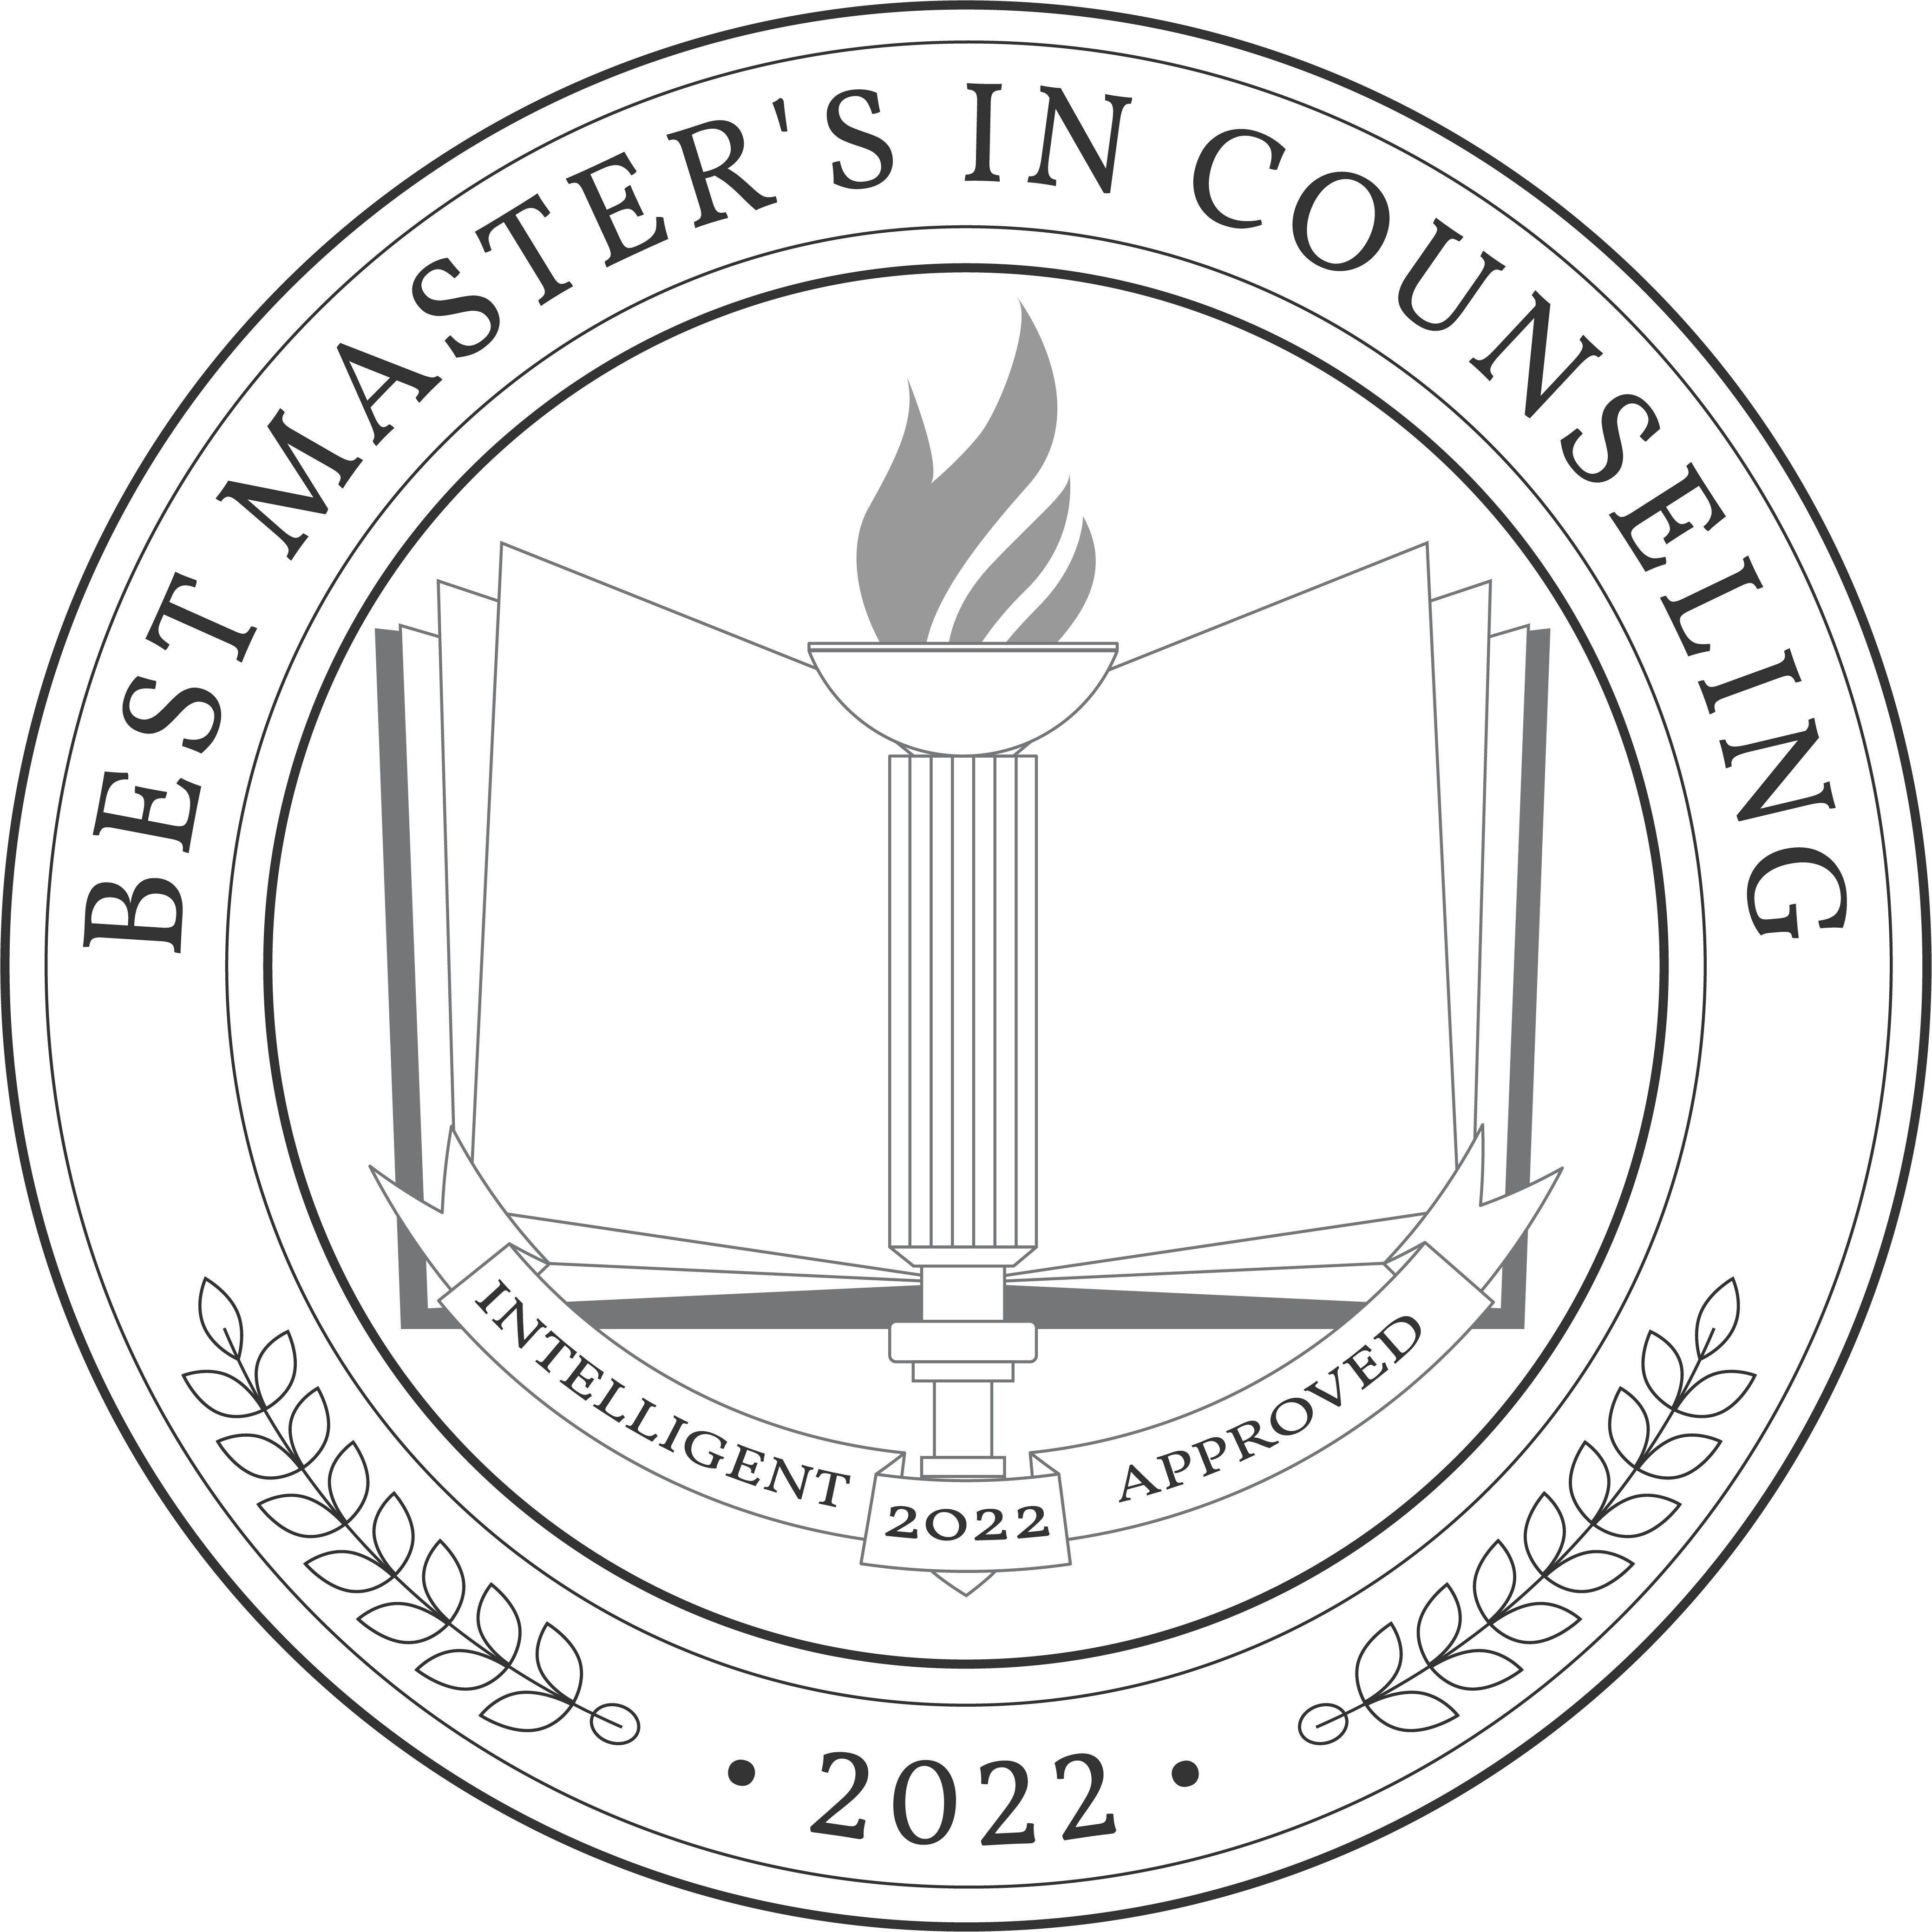 Best Master's in Counseling Degree Programs